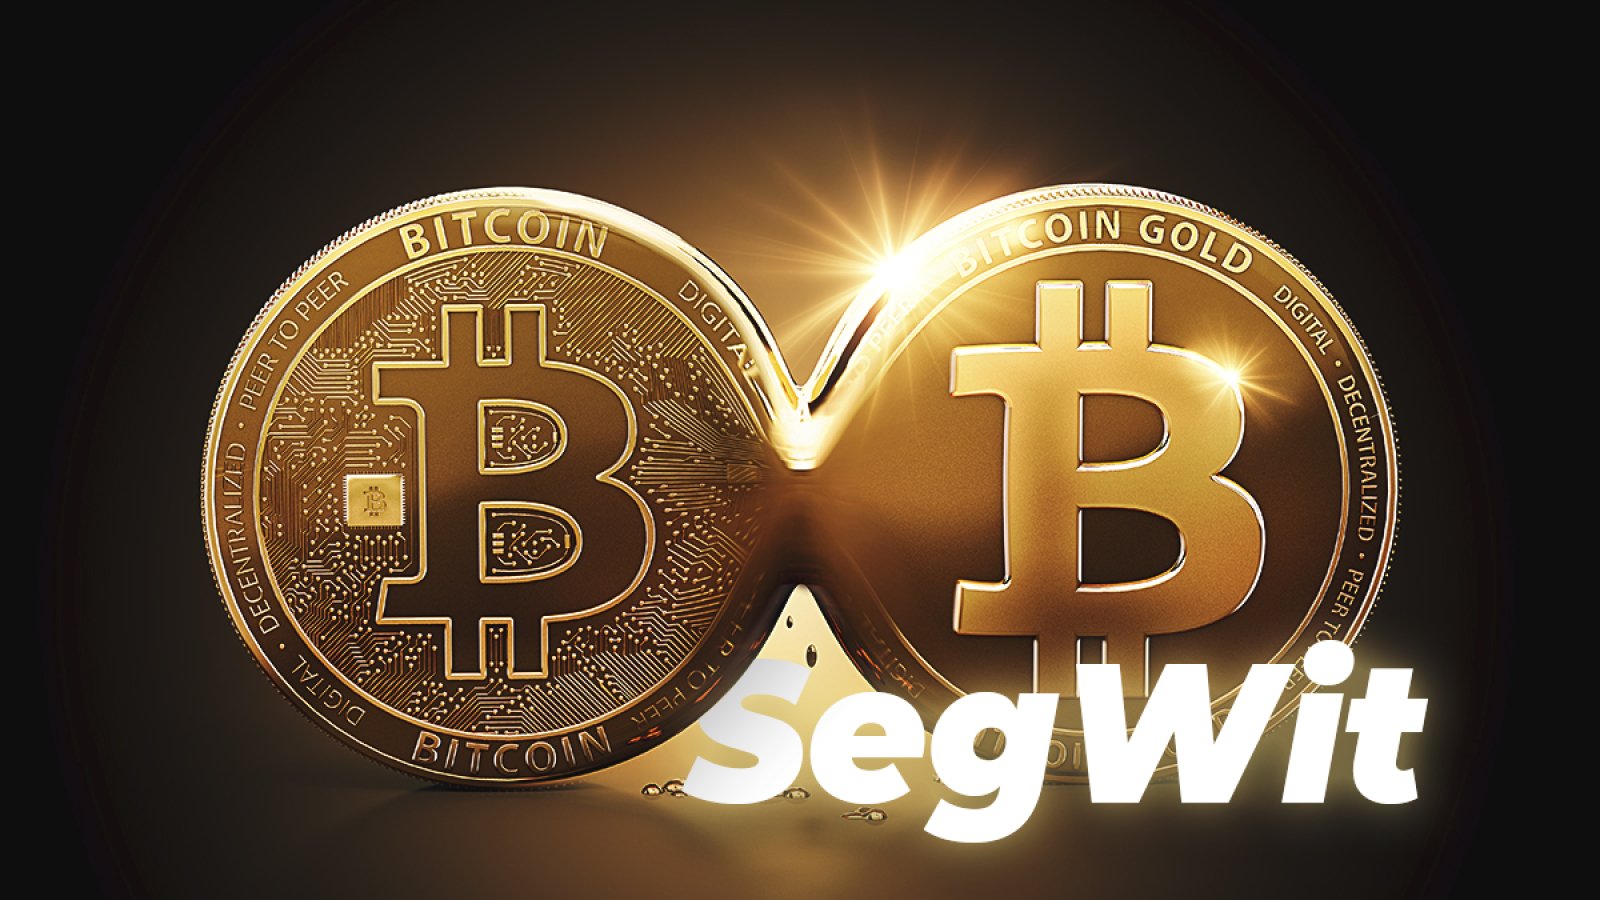 What is Bitcoin's Segregated Witness (SegWit)